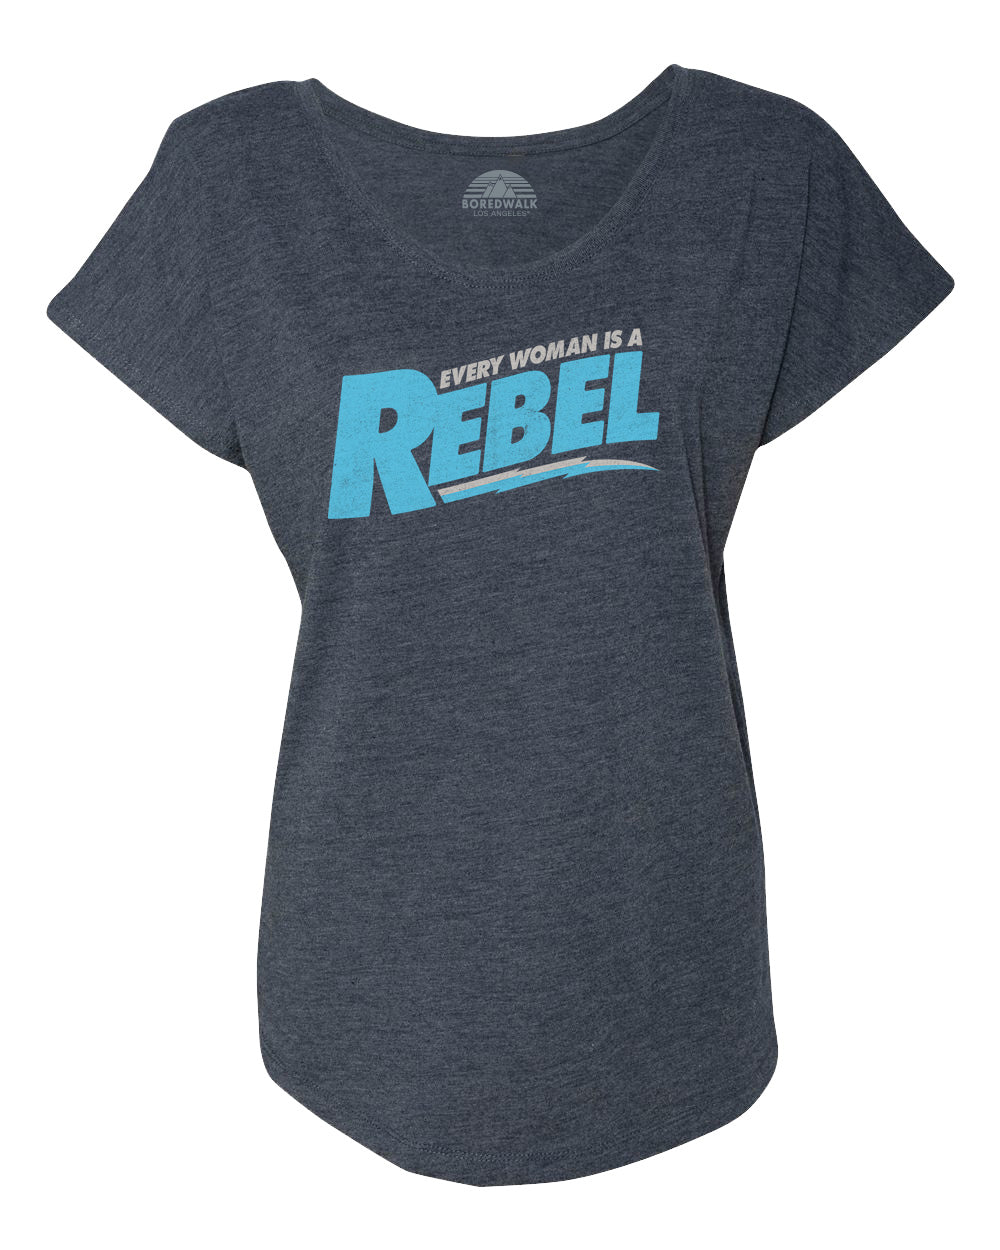 Women's Every Woman is a Rebel Scoop Neck T-Shirt